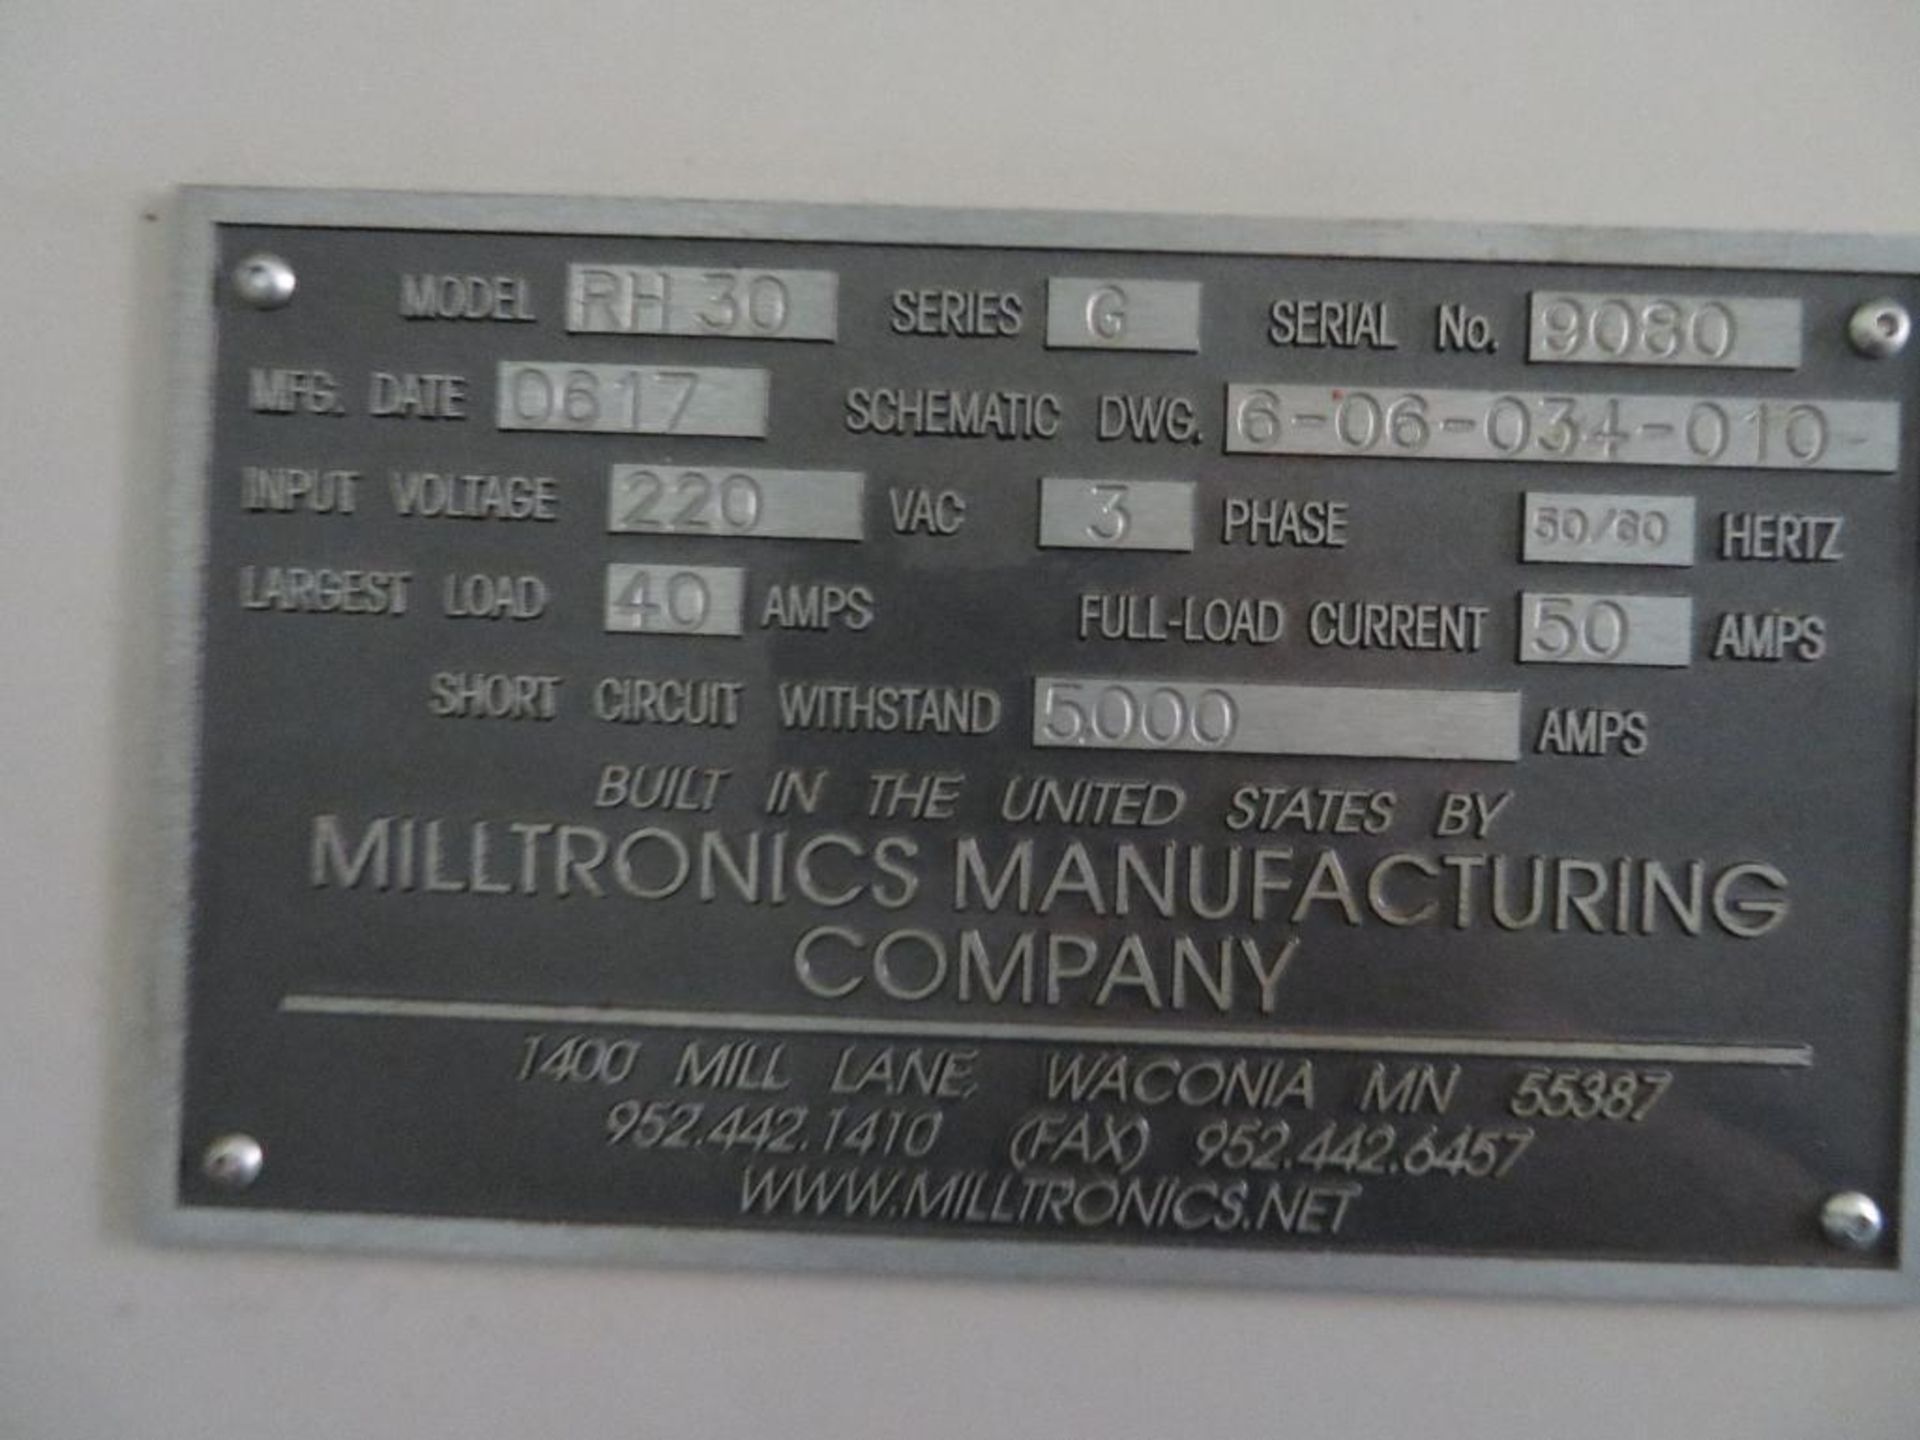 Milltronics 4-Axis CNC Vertical Mill Model RH-30, Series G, S/N 9080(0617), 24 in. x 66 in. Work - Image 6 of 6